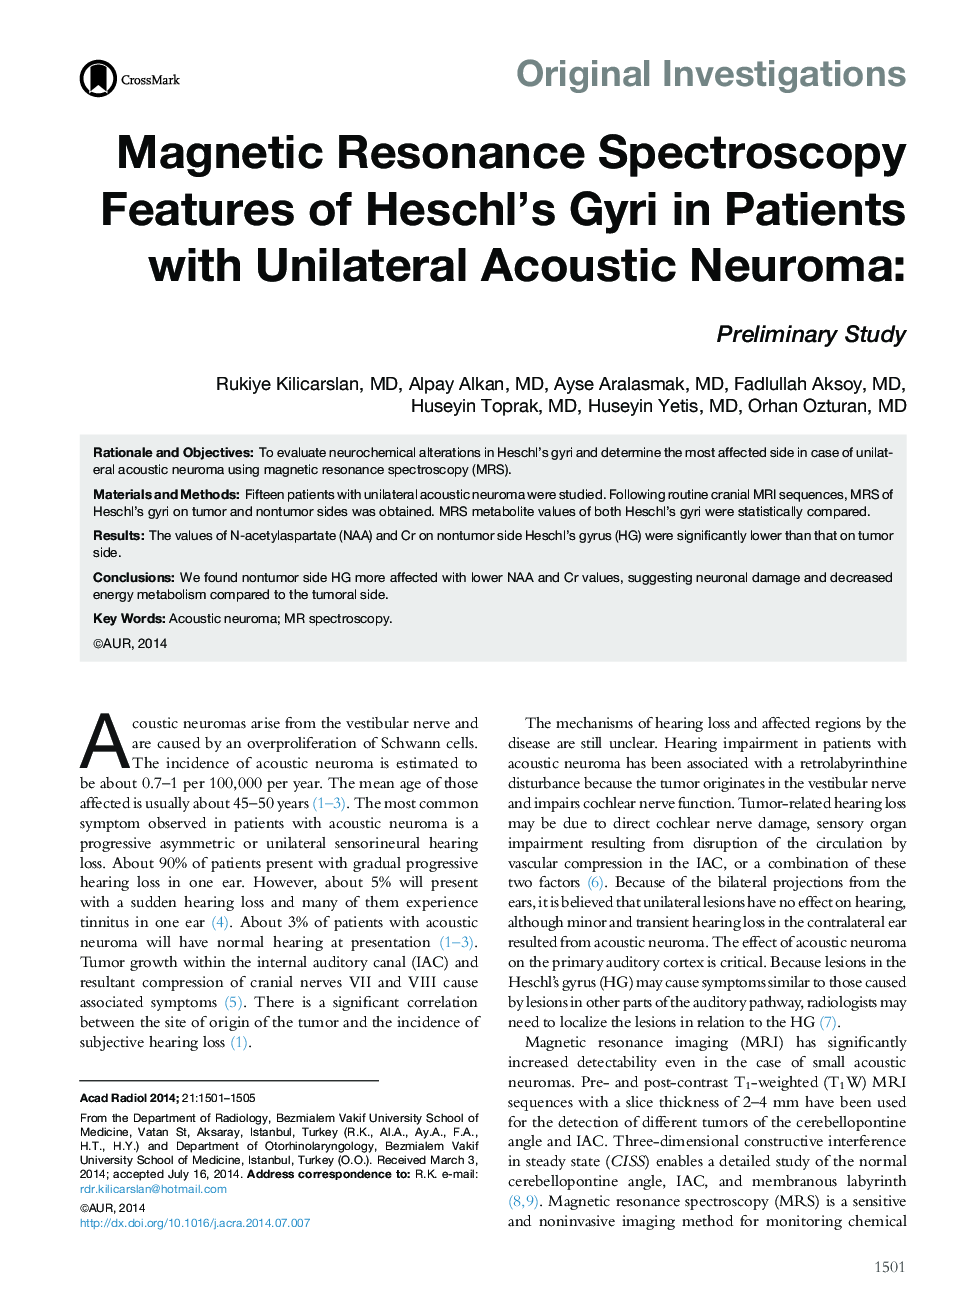 Magnetic Resonance Spectroscopy Features of Heschl's Gyri in Patients with Unilateral Acoustic Neuroma